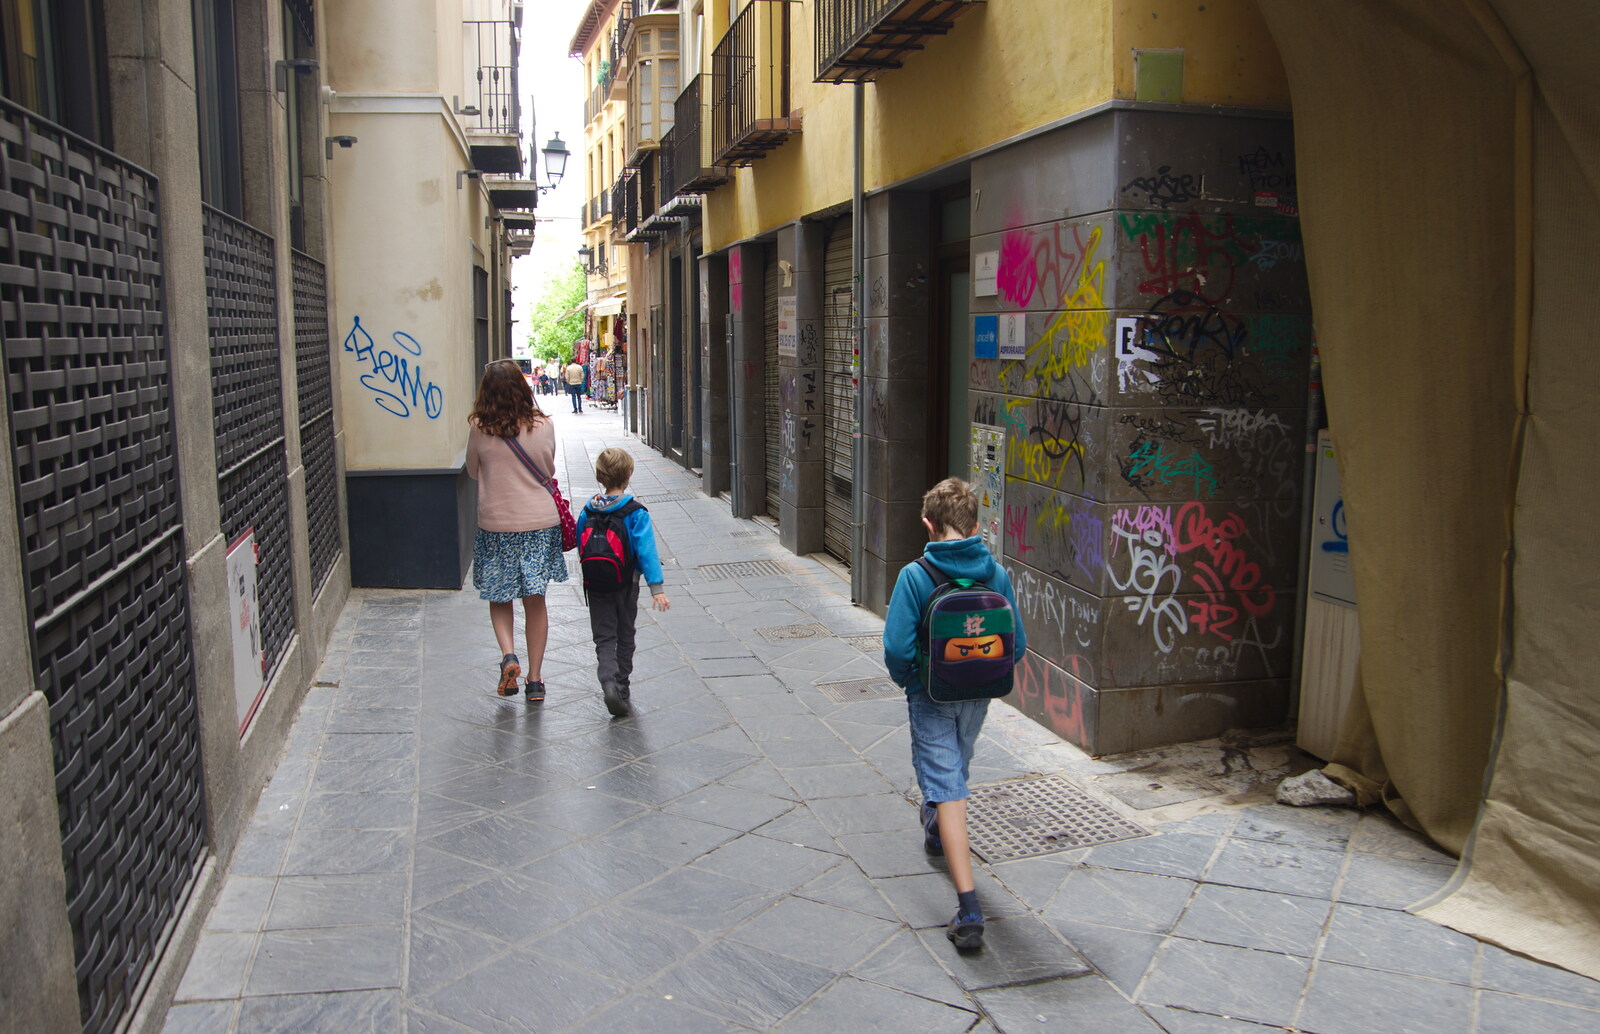 We roam the graffitoed lanes of Granada from A Walk up a Hill, Paella on the Beach and Granada, Andalusia, Spain - 19th April 2018